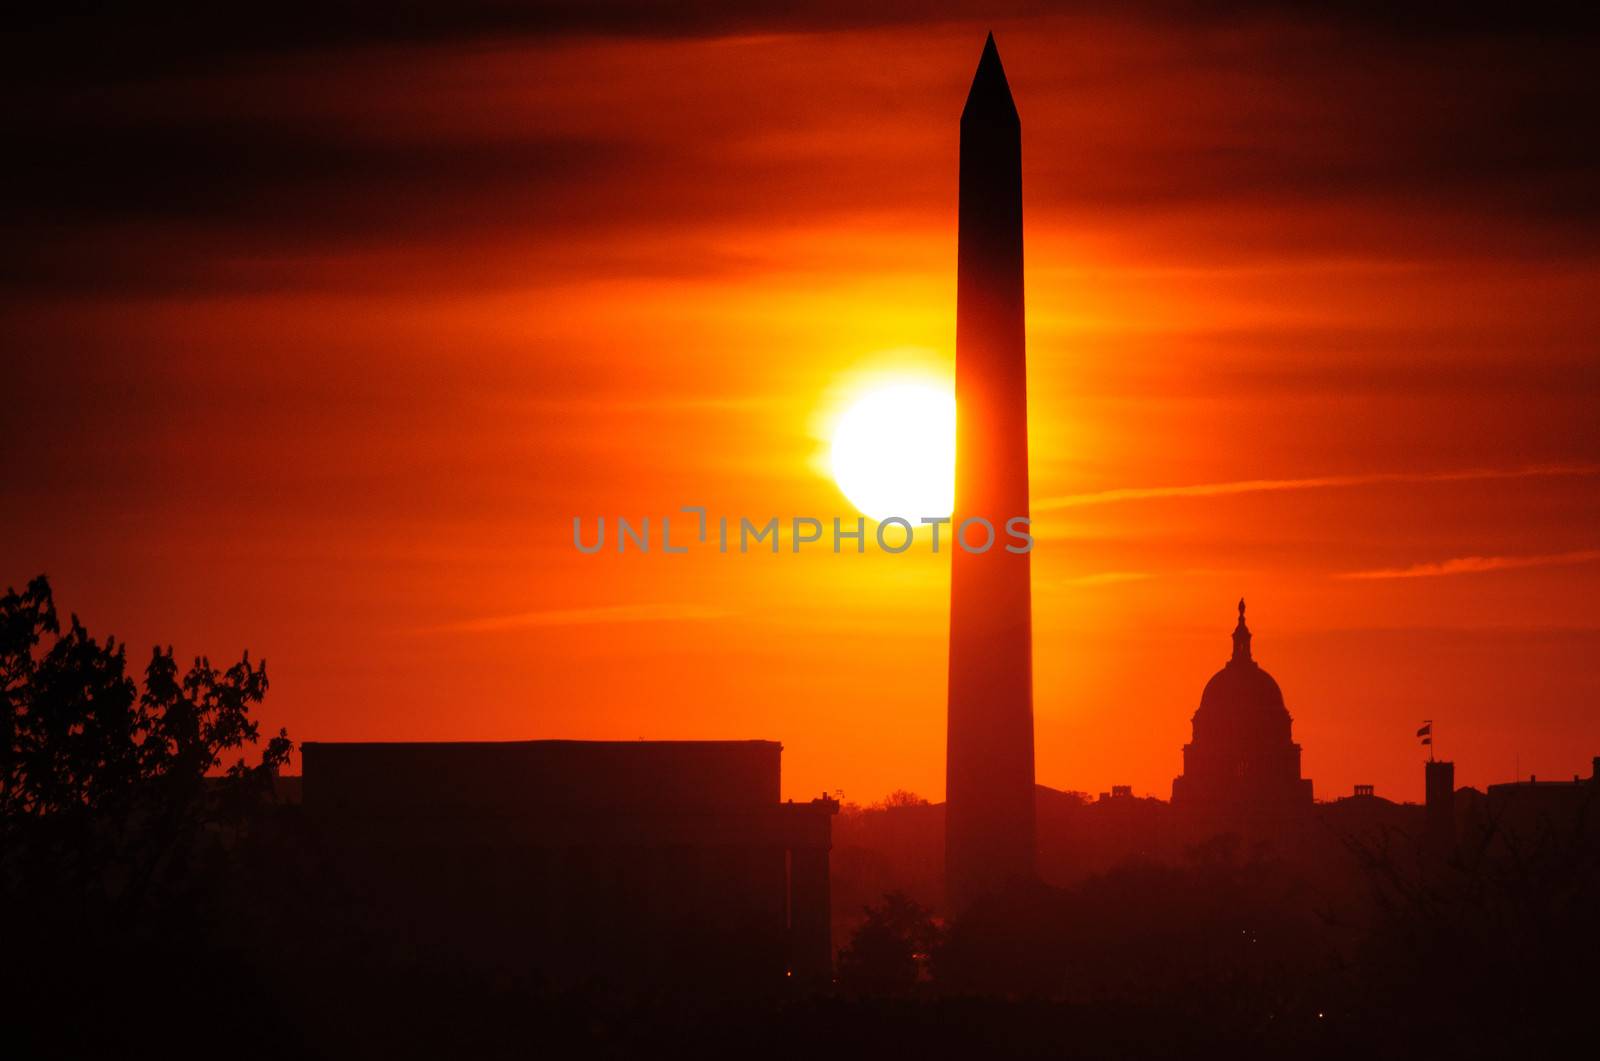 Lincoln Memorial and Washington Monument silhouetted with red sunset background, Washington, D.C, U.S.A.